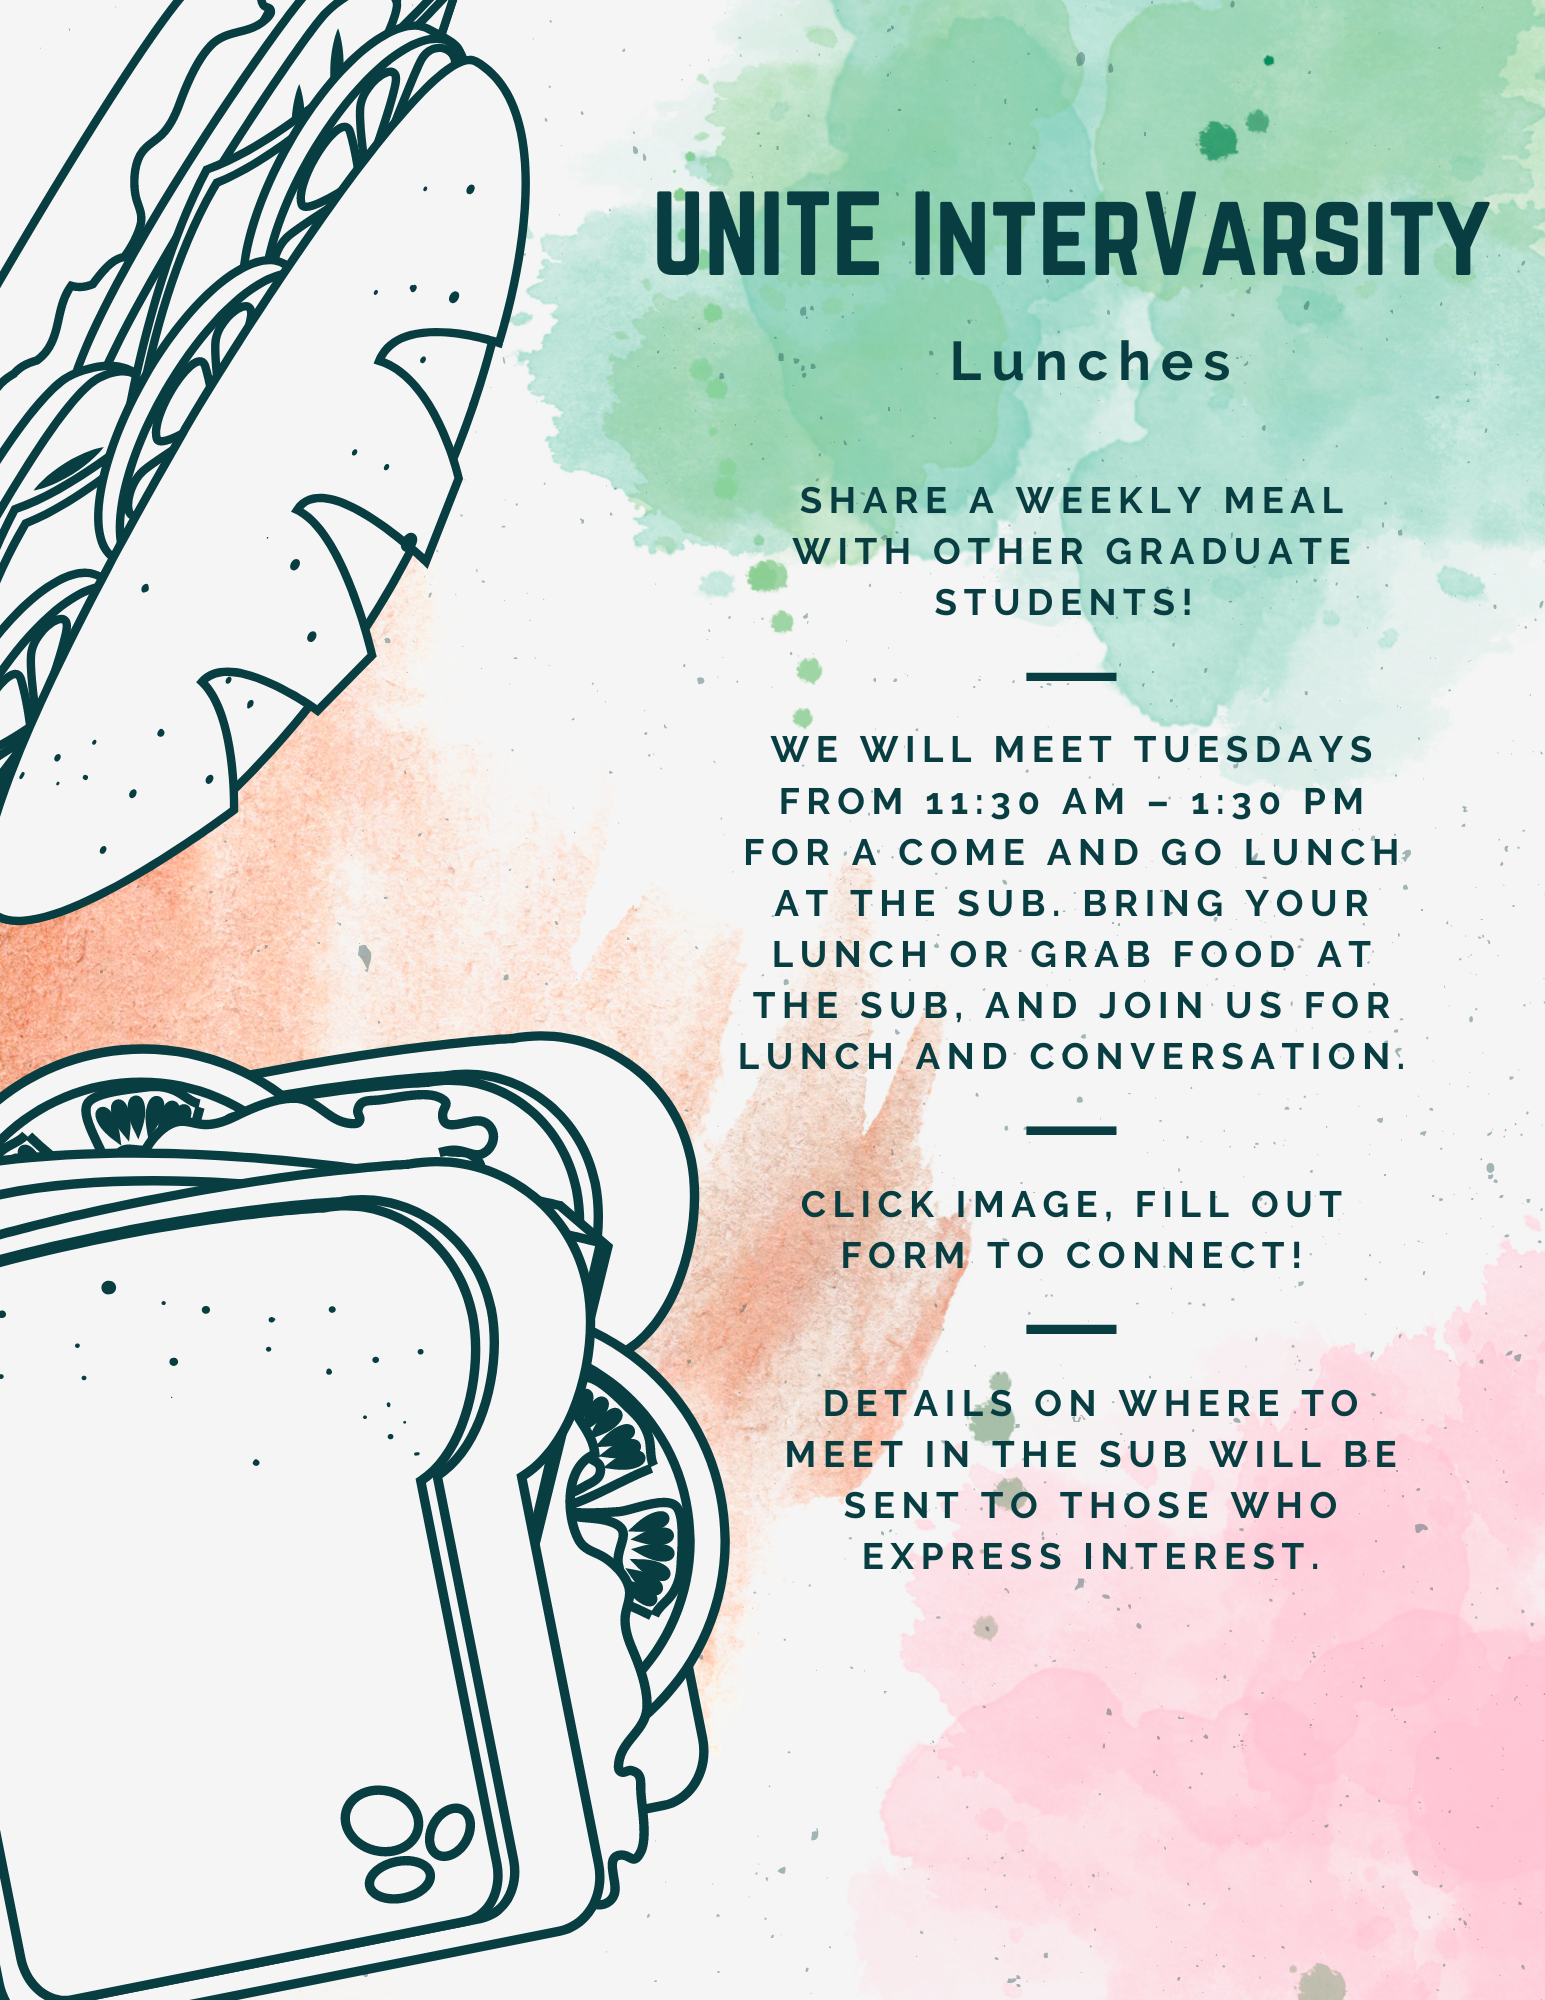 UNITE InterVarsity Lunches Share a weekly meal with other graduate students! We will meet Tuesdays from 11:30 am – 1:30 pm for a come and go lunch at the SUB. Bring your lunch or grab food at the SUB, and join us for lunch and conversation. Click Image! Fill out form to connect. Details on where to meet in the SUB will be sent to those who express interest.